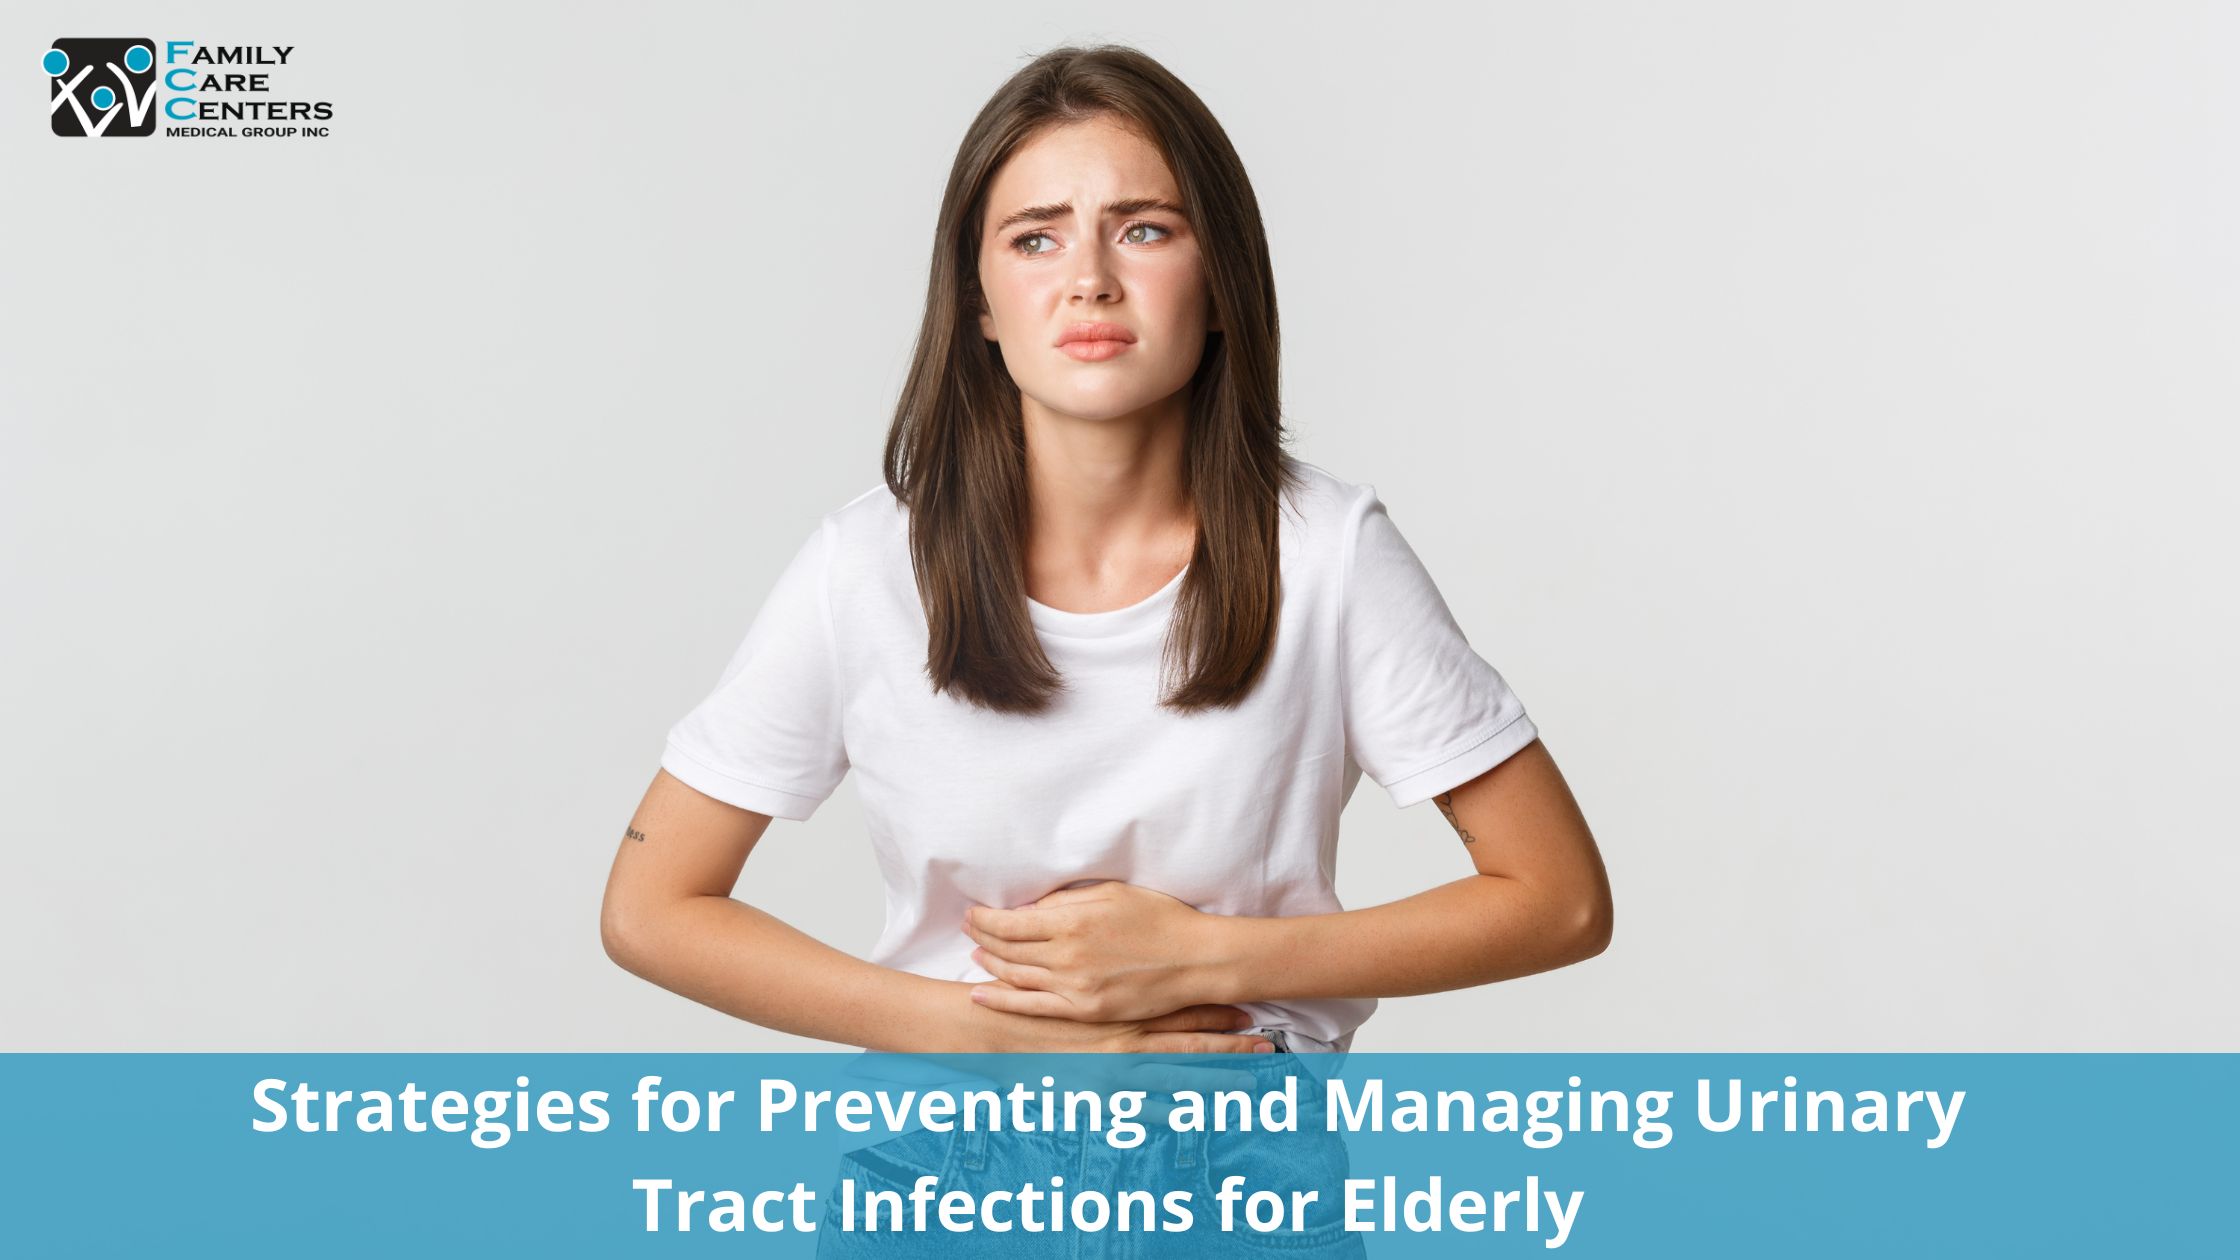 Strategies for Preventing and Managing Urinary Tract Infections for Elderly